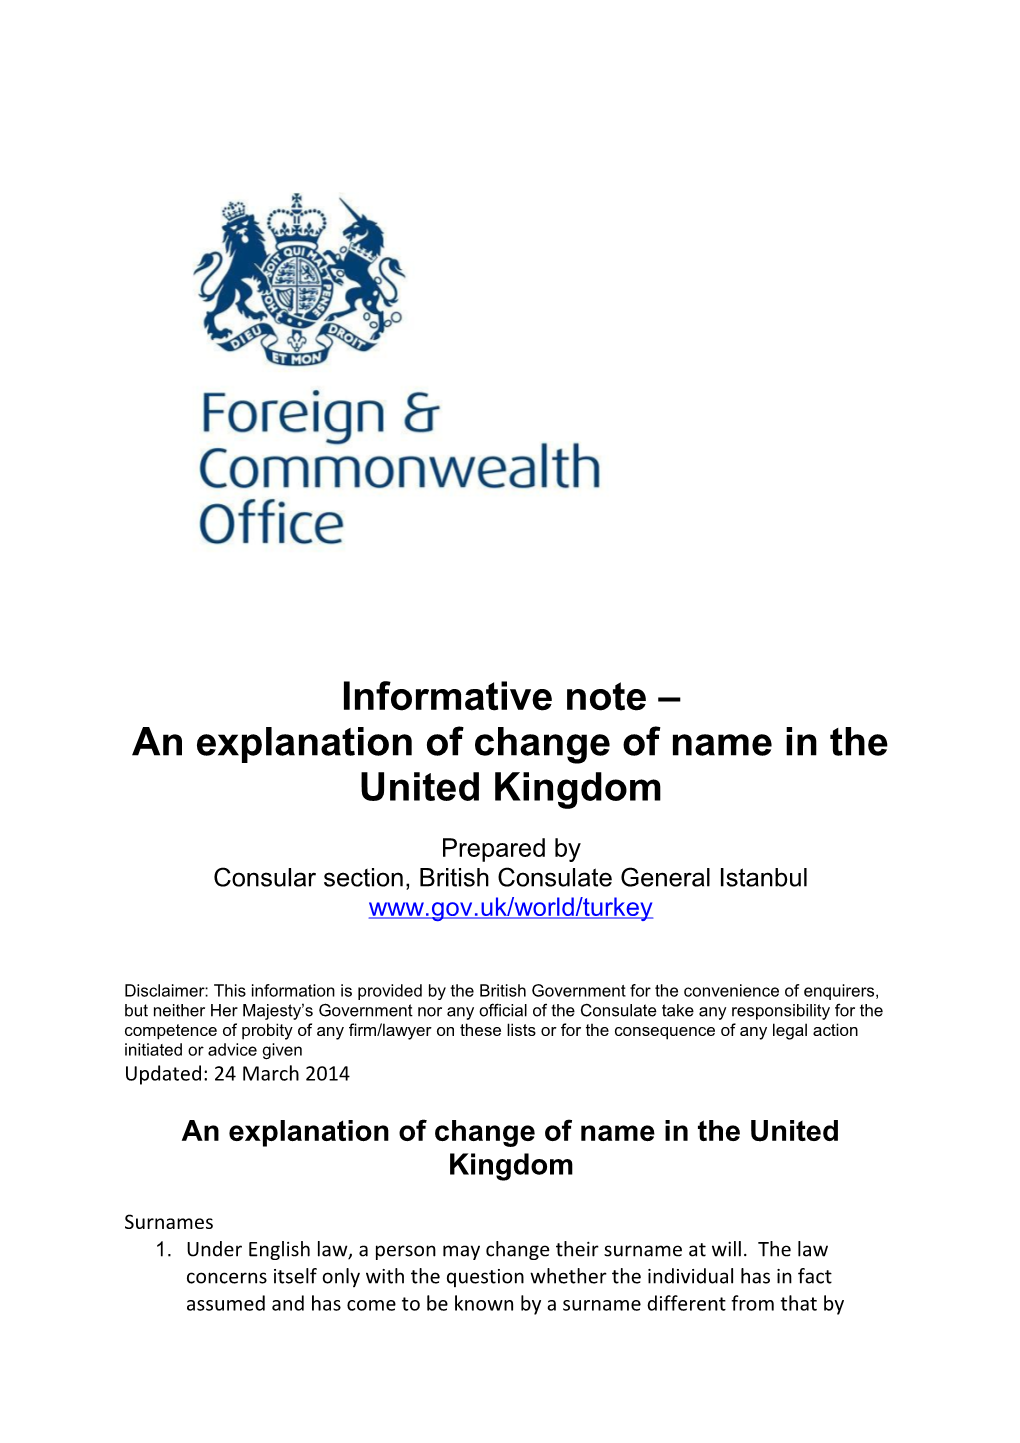 An Explanation of Change of Name in the United Kingdom